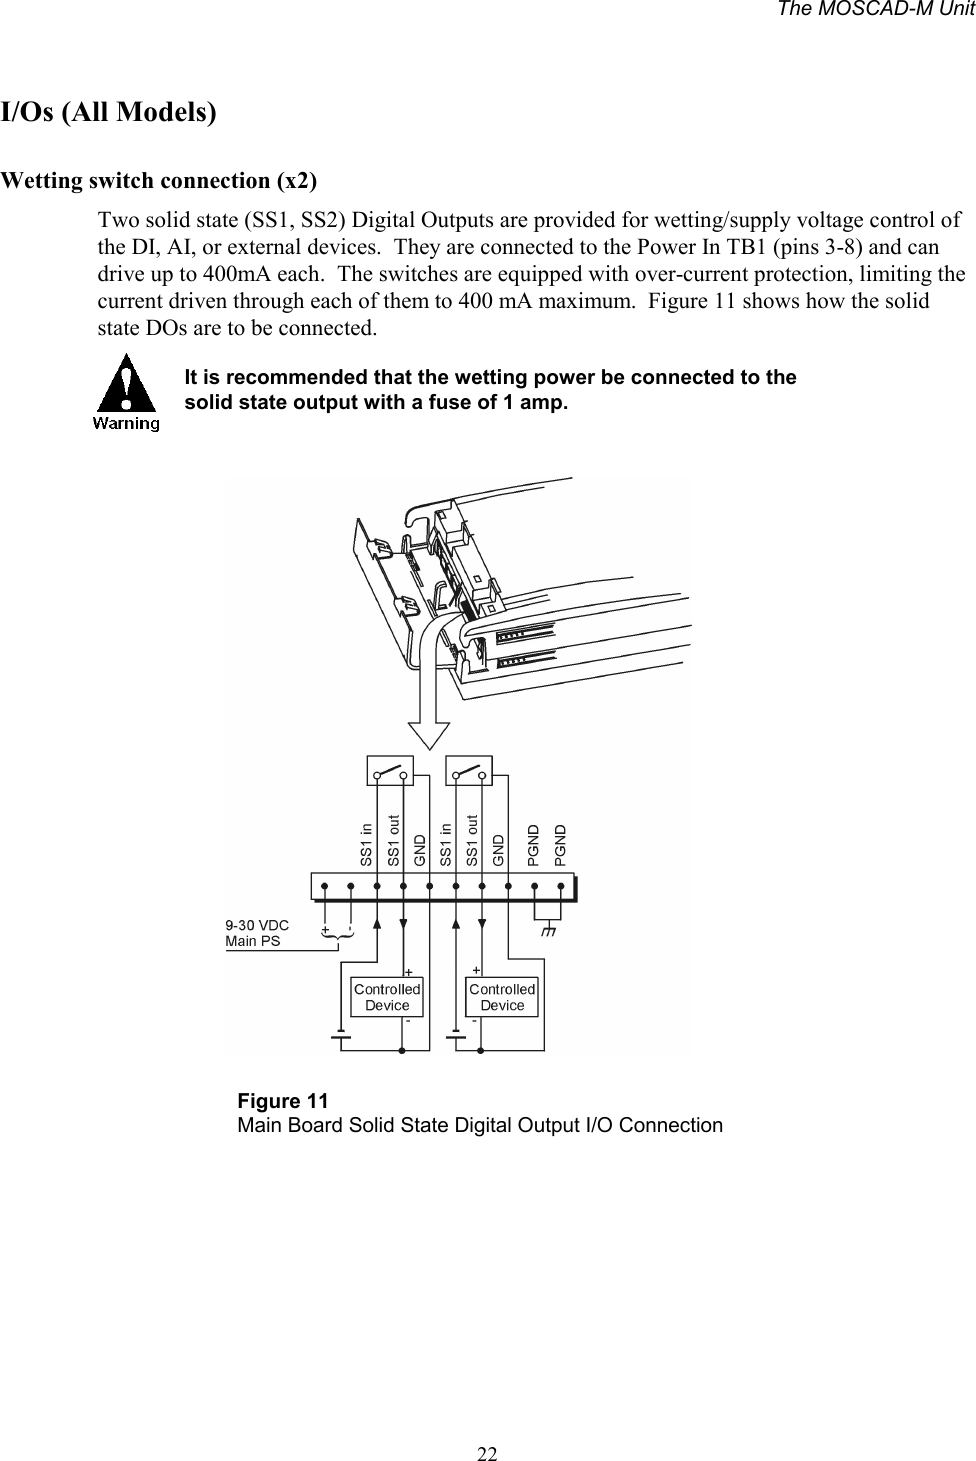 The MOSCAD-M Unit22I/Os (All Models)Wetting switch connection (x2)Two solid state (SS1, SS2) Digital Outputs are provided for wetting/supply voltage control ofthe DI, AI, or external devices.  They are connected to the Power In TB1 (pins 3-8) and candrive up to 400mA each.  The switches are equipped with over-current protection, limiting thecurrent driven through each of them to 400 mA maximum.  Figure 11 shows how the solidstate DOs are to be connected.It is recommended that the wetting power be connected to thesolid state output with a fuse of 1 amp.Figure 11Main Board Solid State Digital Output I/O Connection